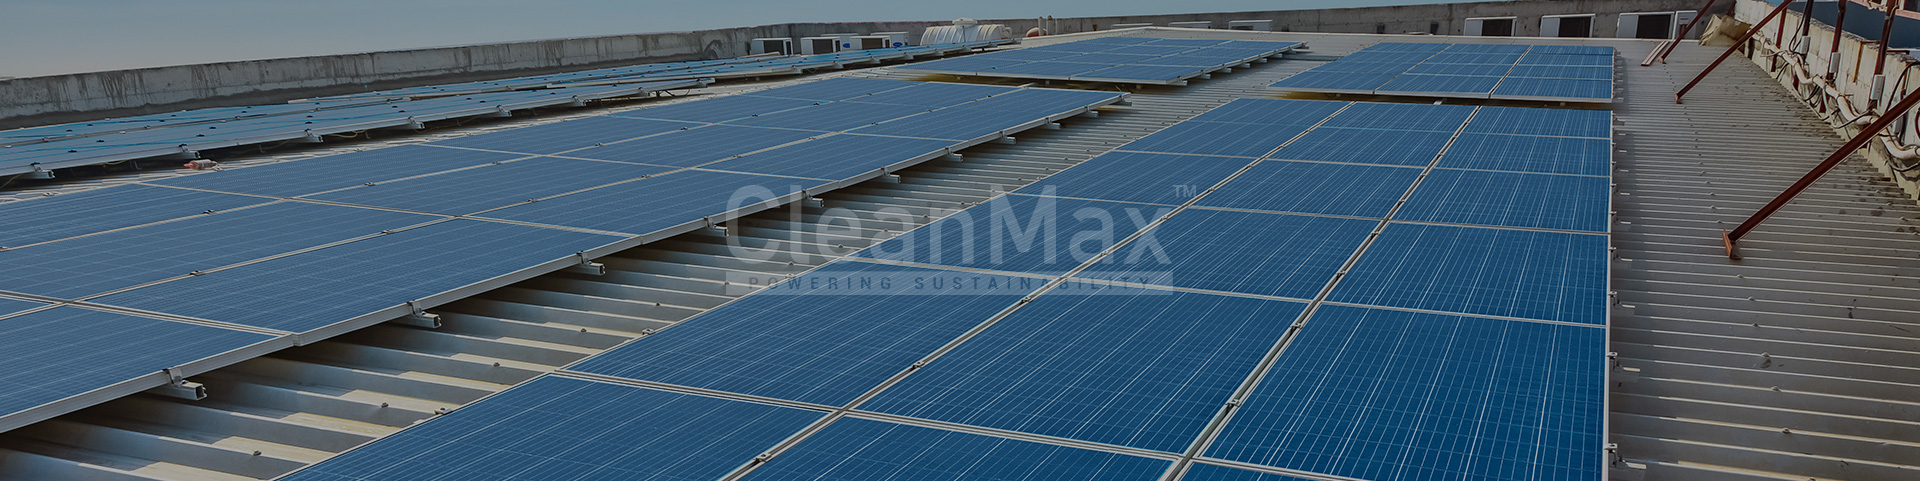 CleanMax solar panel installation on a rooftop 